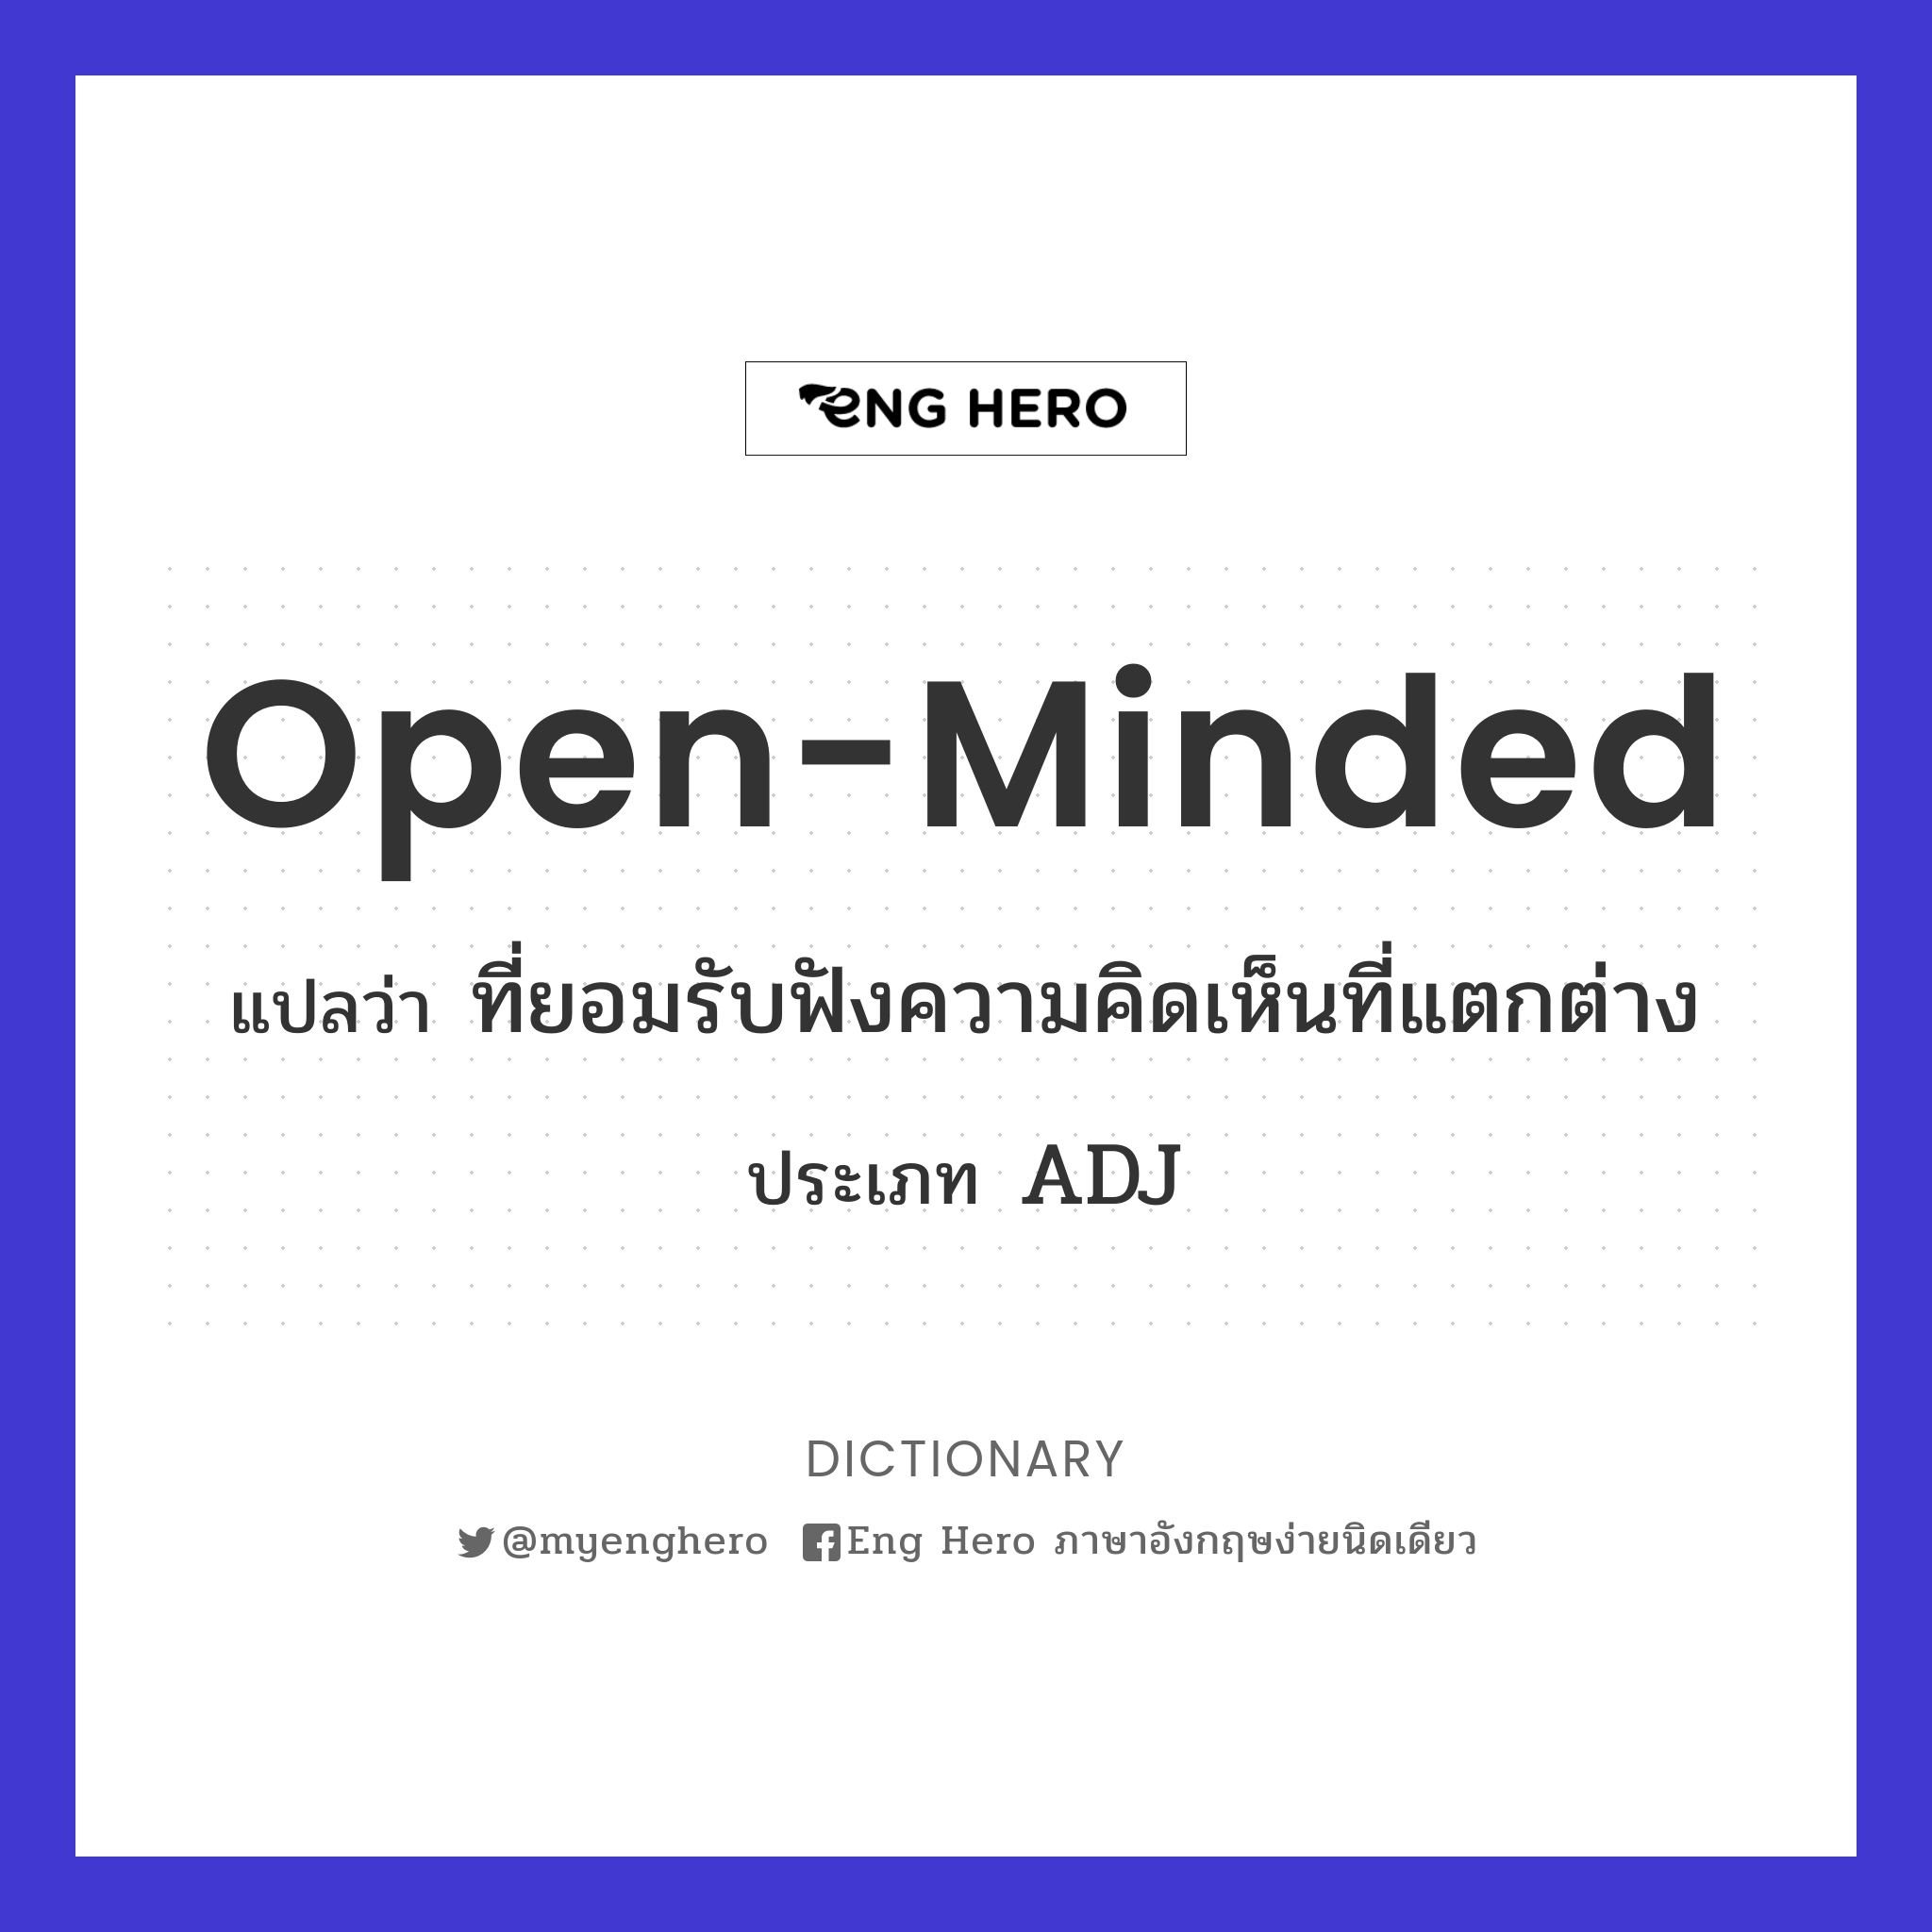 open-minded